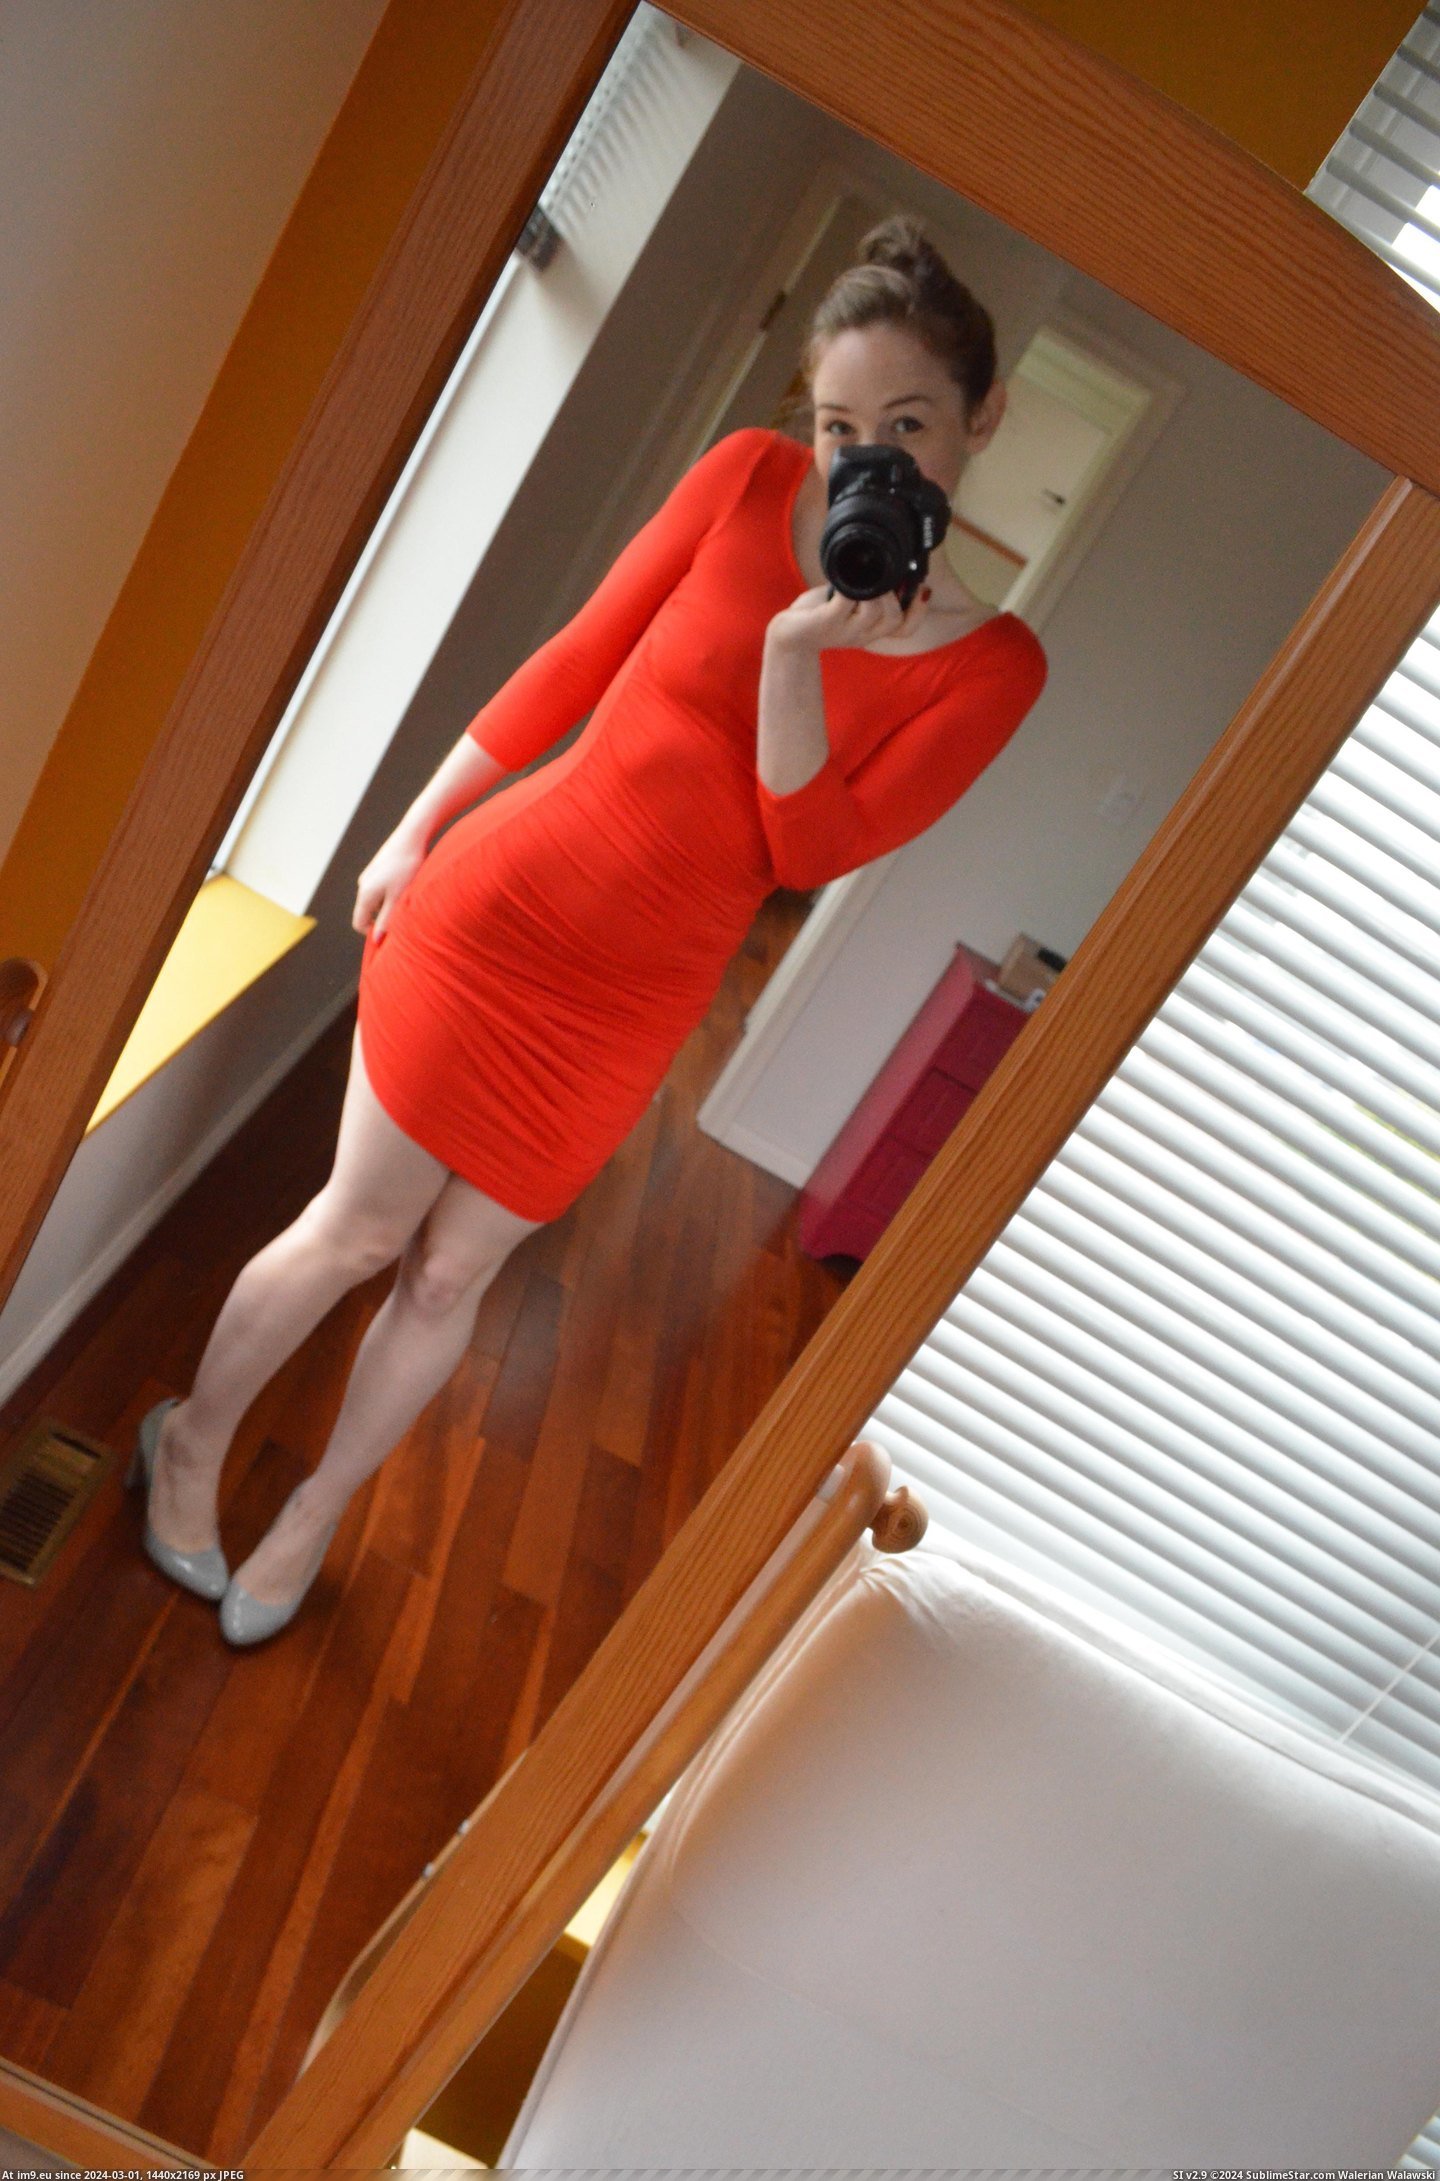 #Tight #Dress #Xmas #Too #Party [Gonewild] Is this dress too tight [f]or an Xmas party? 4 Pic. (Obraz z album My r/GONEWILD favs))